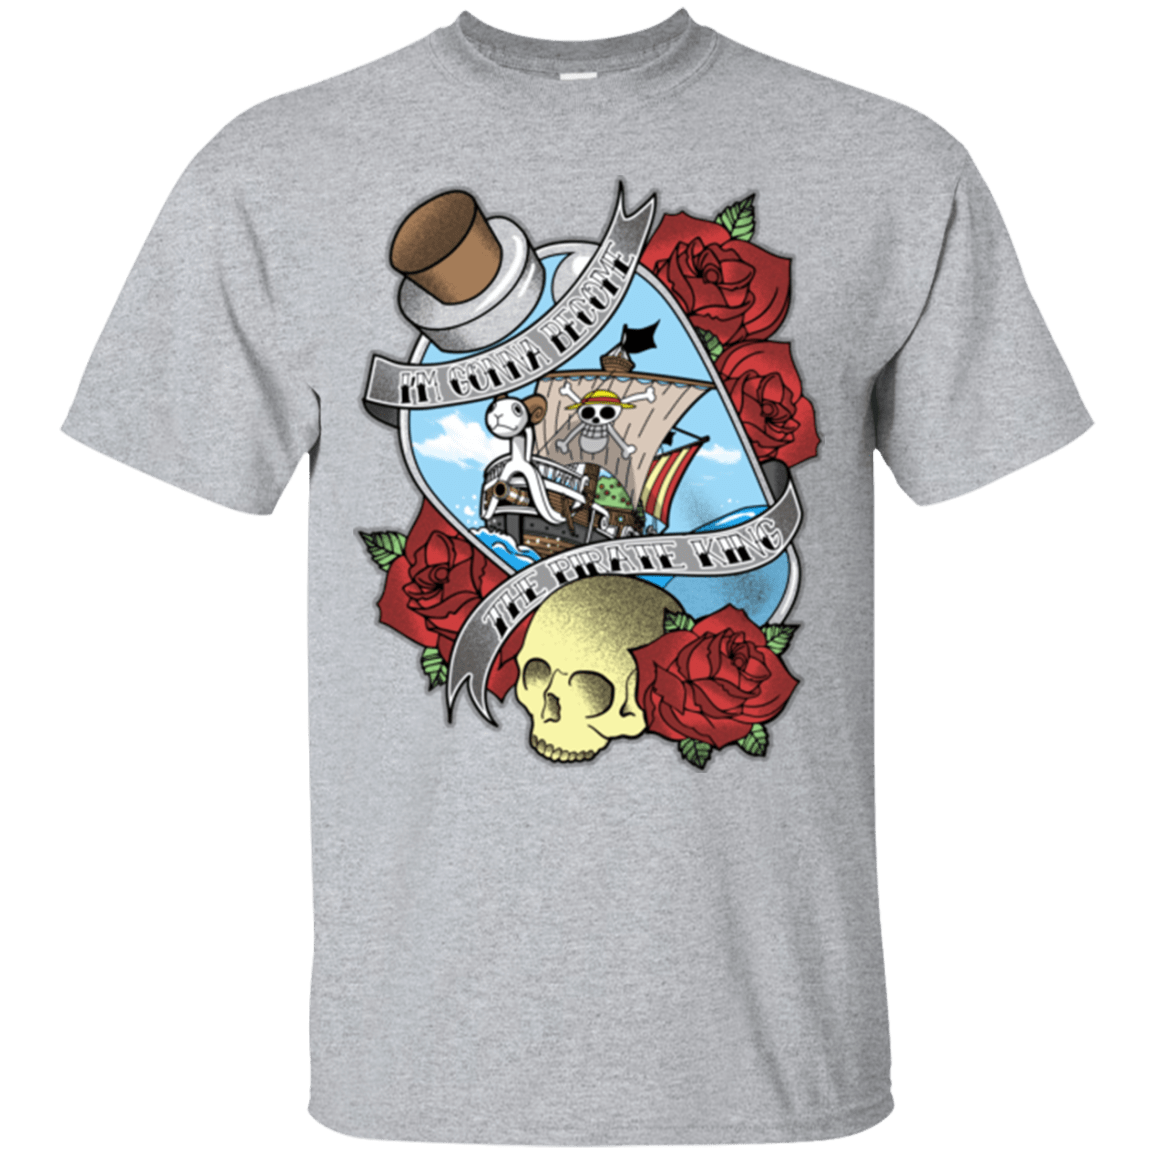 T-Shirts Sport Grey / Small The Pirate King T-Shirt